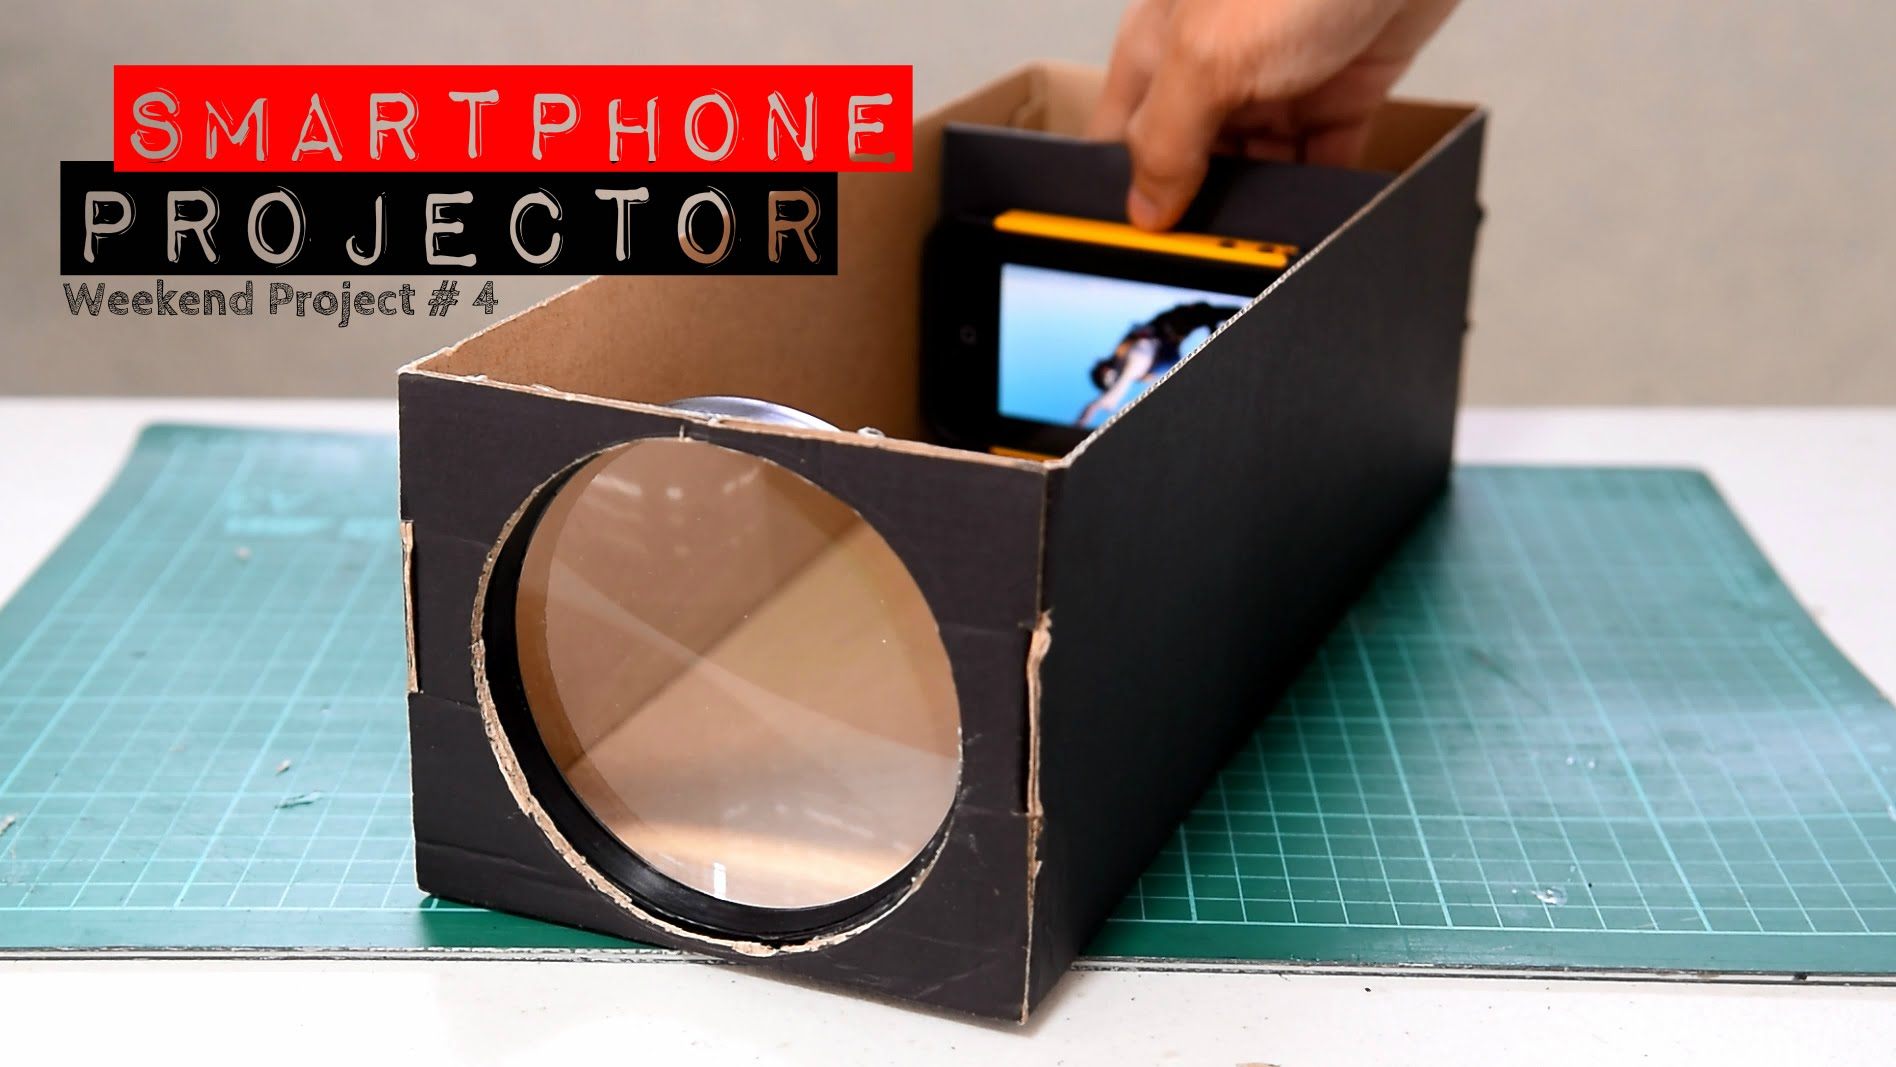 How To Make Your DIY Smartphone Projector With A Shoebox